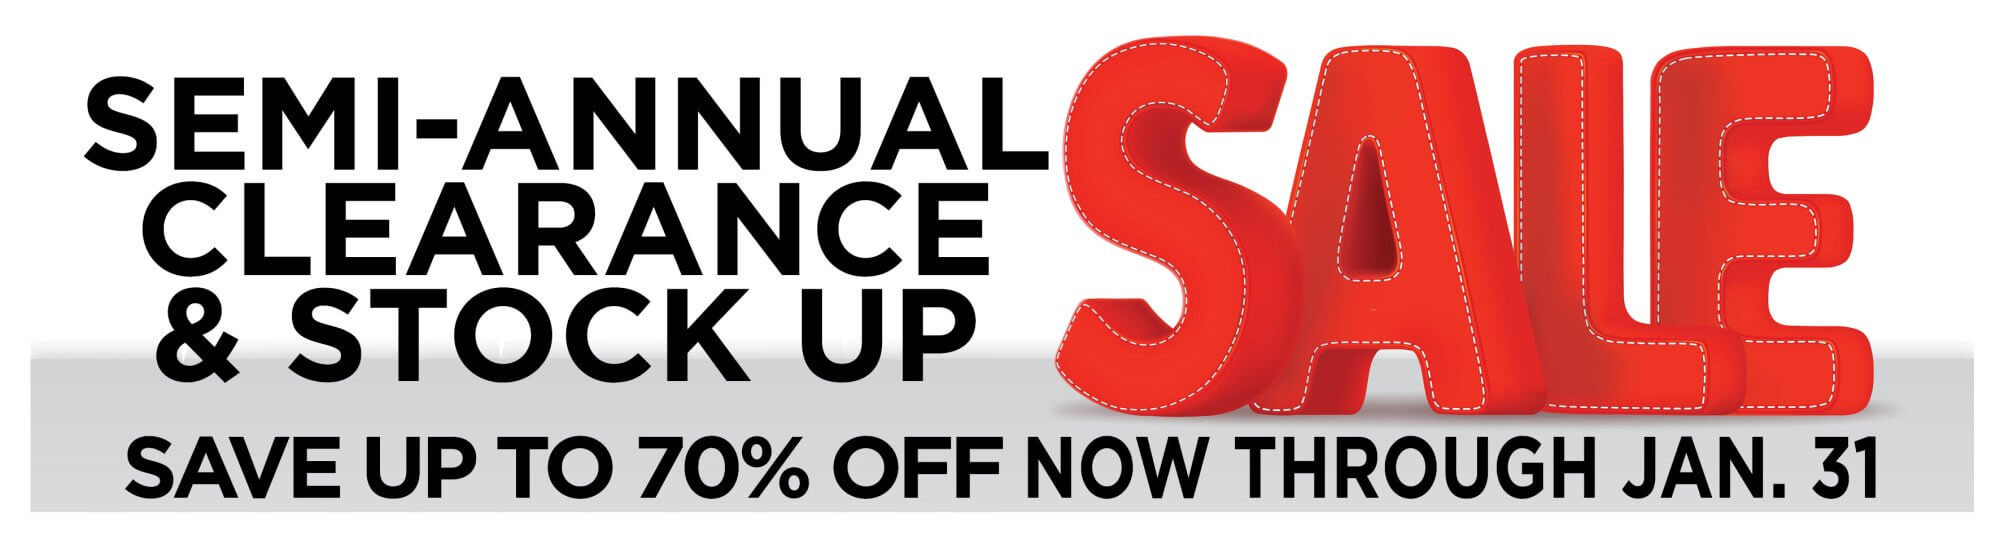 HALF-ANNUAL CLEARANCE AND STOCK SALE ON ShopNZP.com